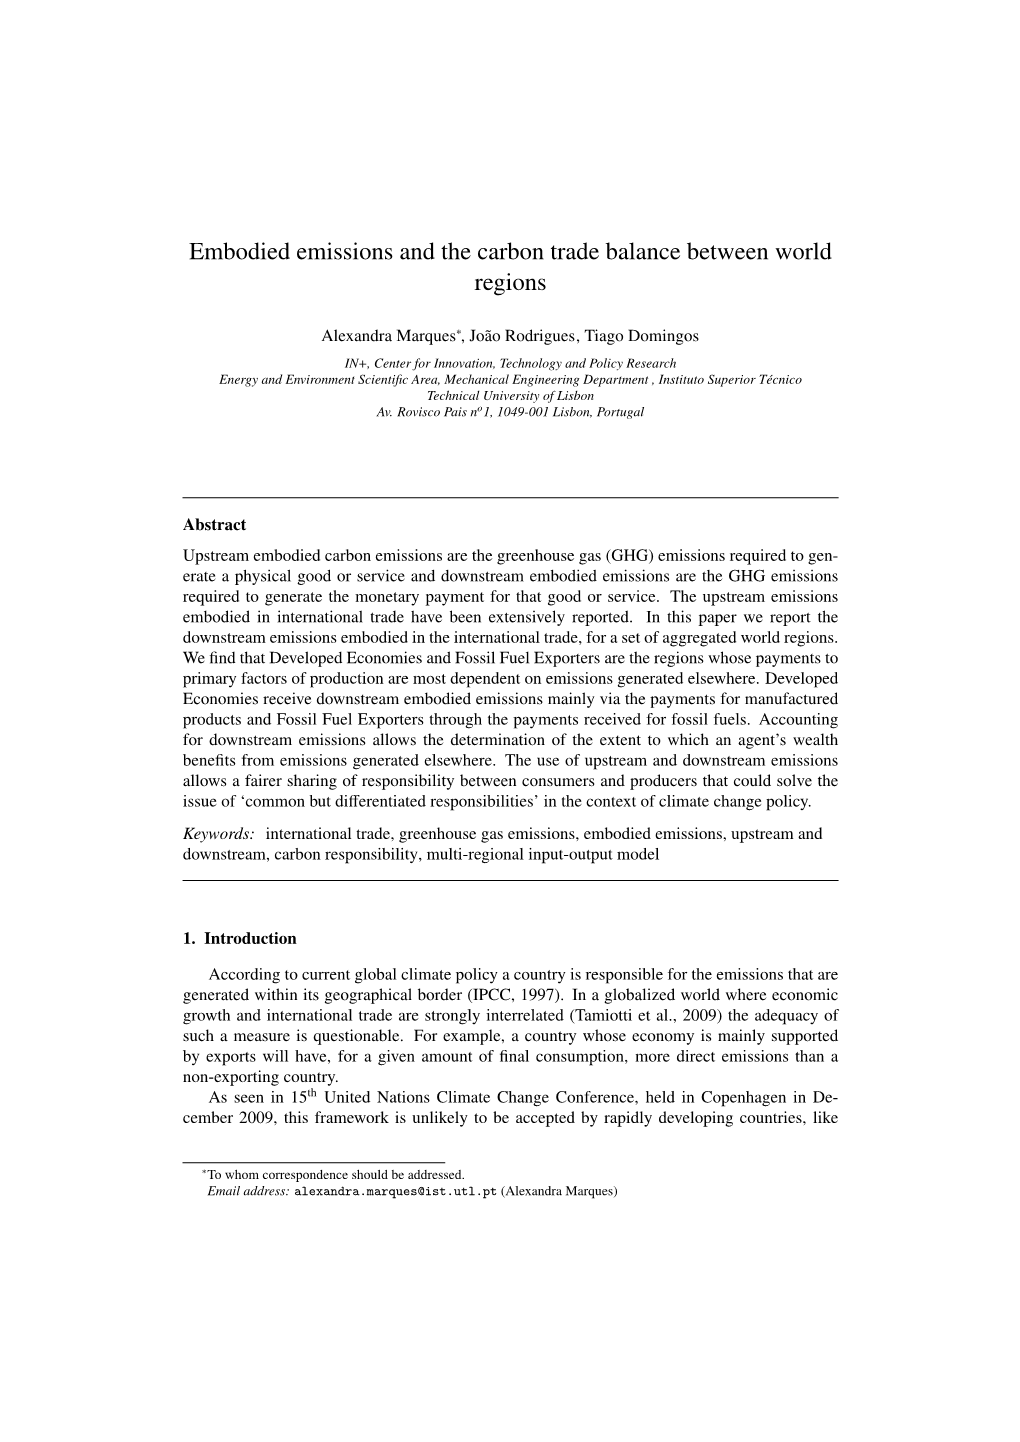 Embodied Emissions and the Carbon Trade Balance Between World Regions